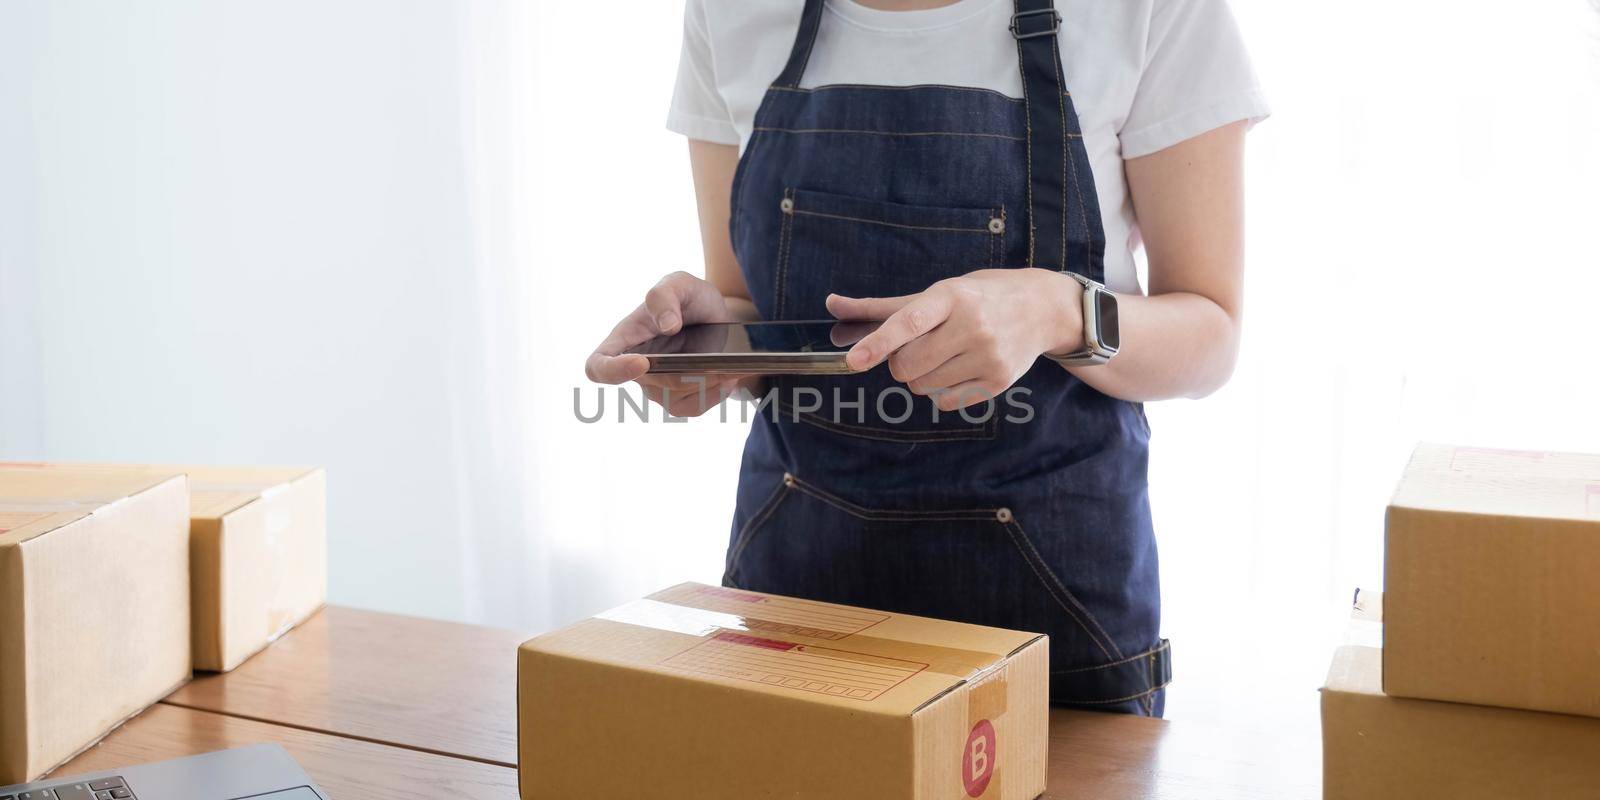 Hands of Asian woman entrepreneur holding smartphone with cardboard boxes, computer laptop, online selling equipments. Packing, business and technology concept. Top view, copy space.